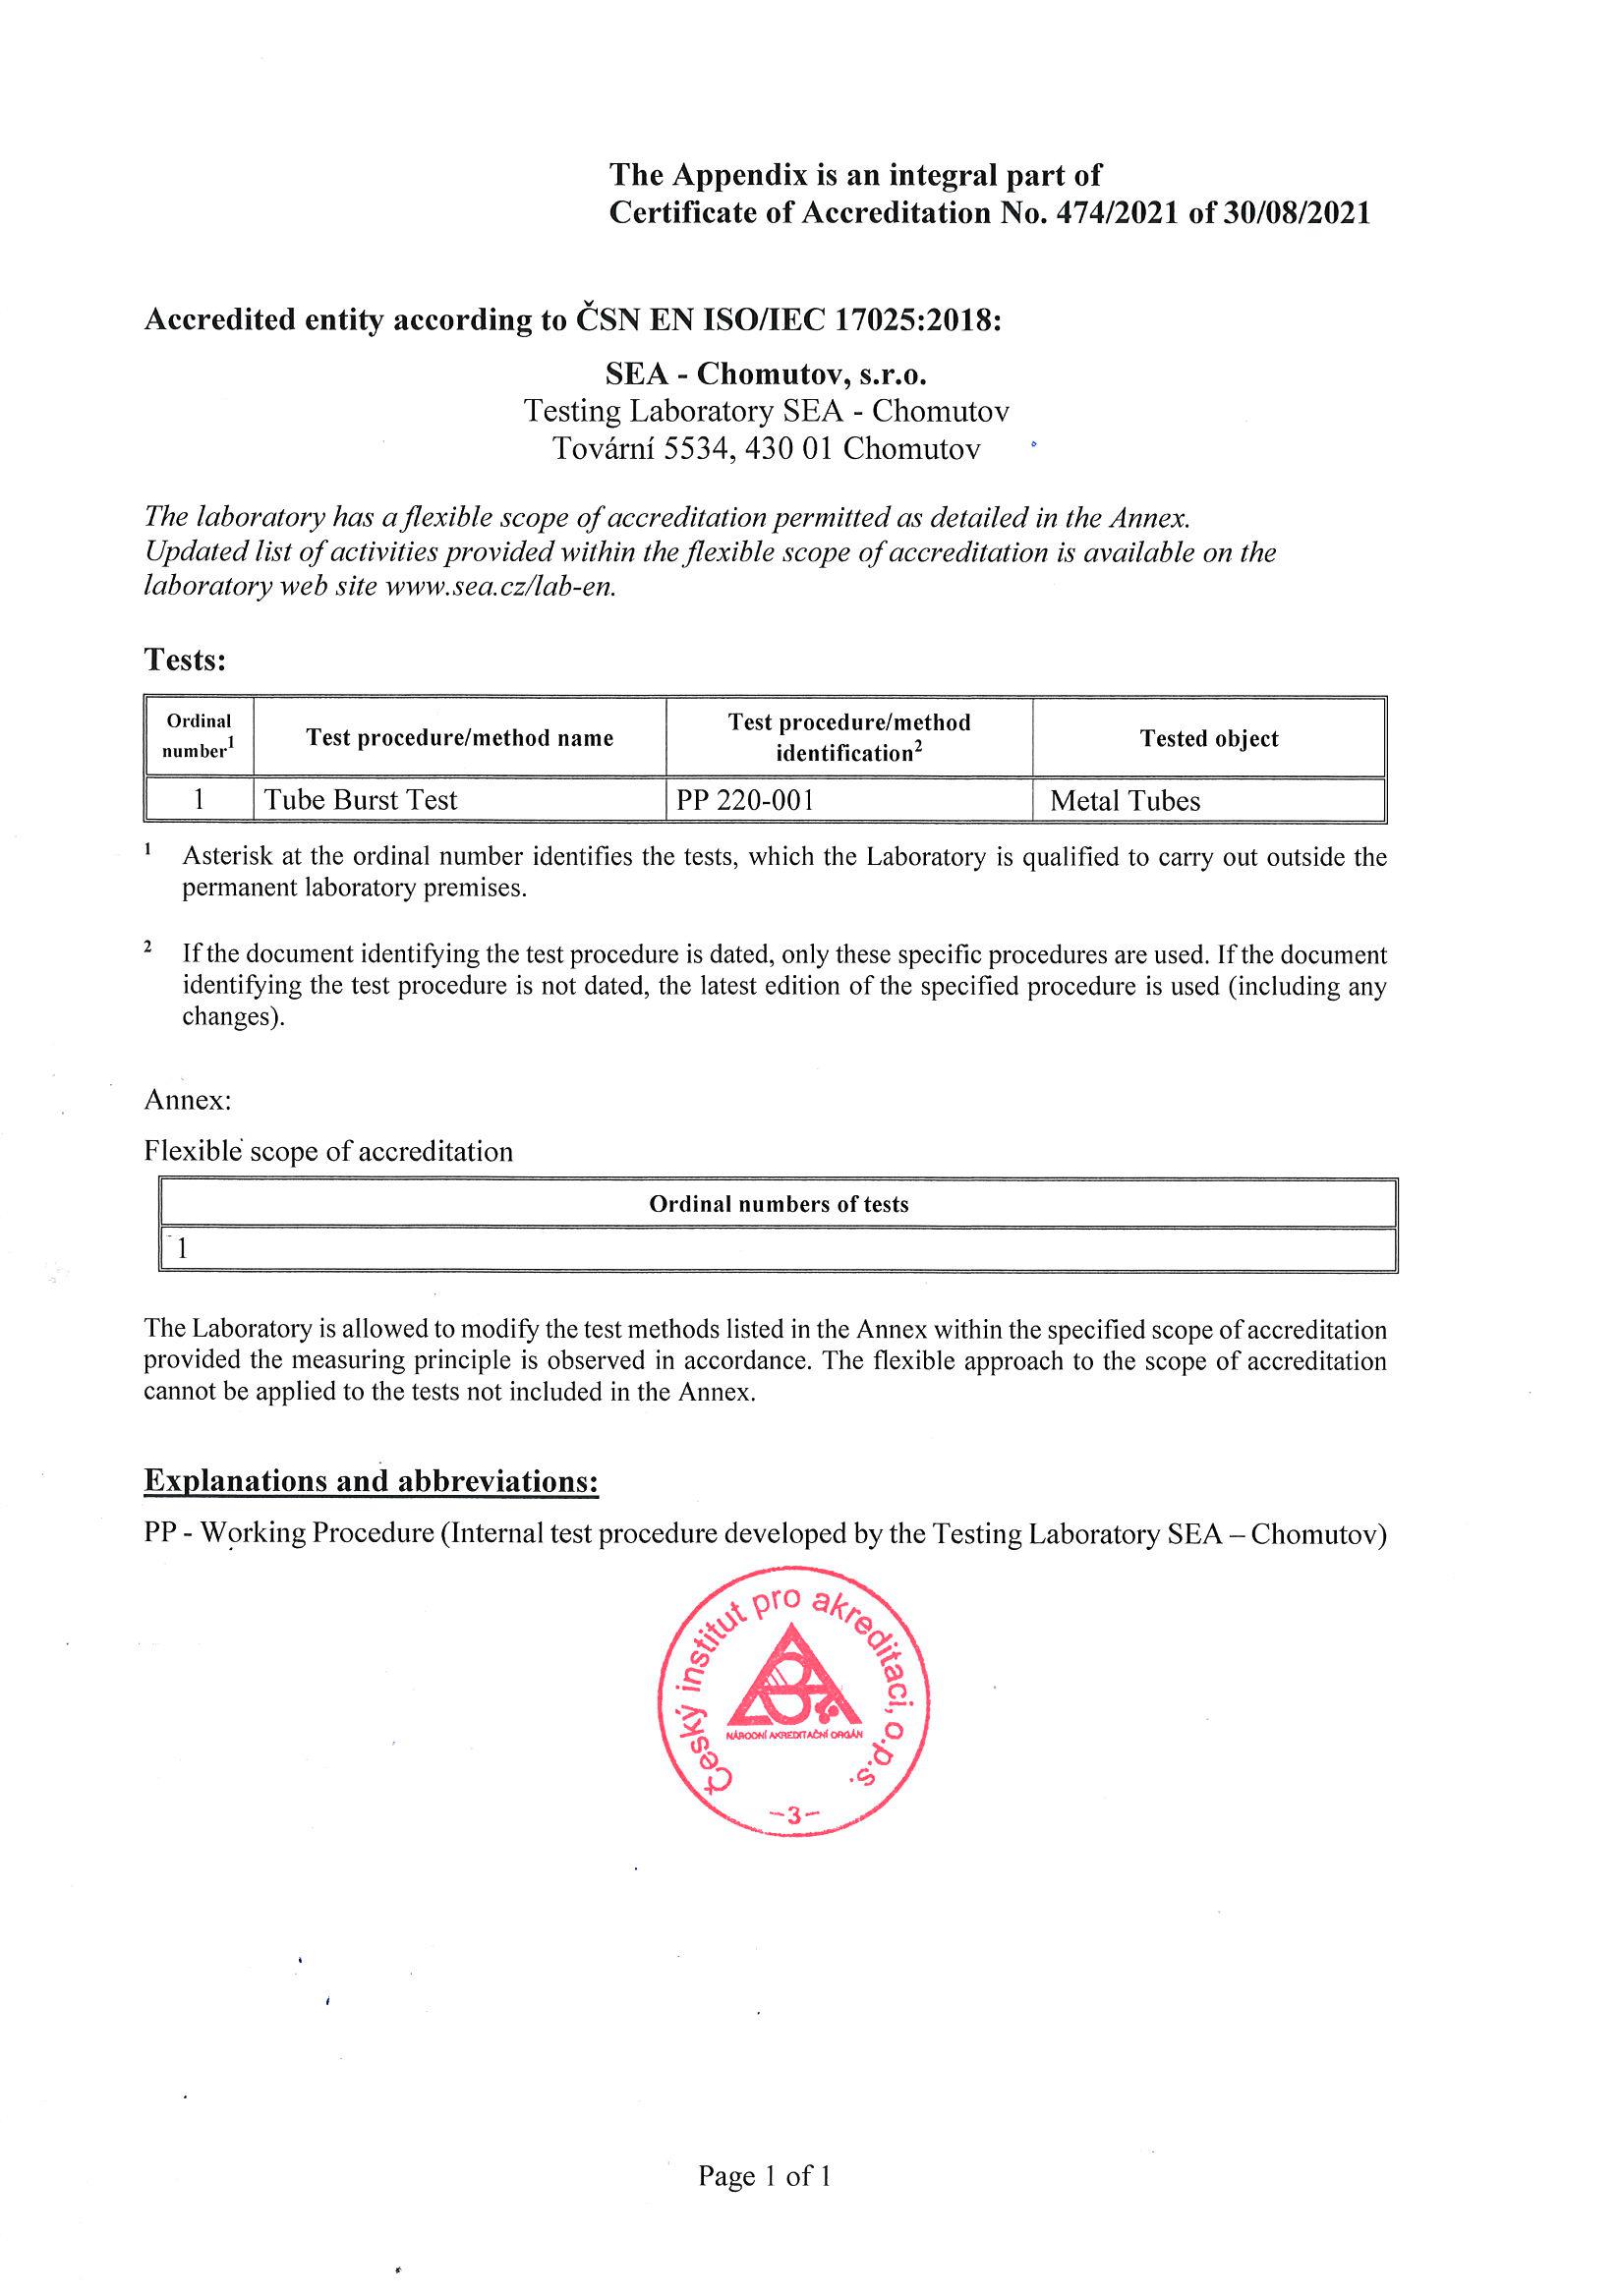 Appendix to the certificate of accreditation of testing laboratory according to ČSN EN ISO / IEC 17025:2005